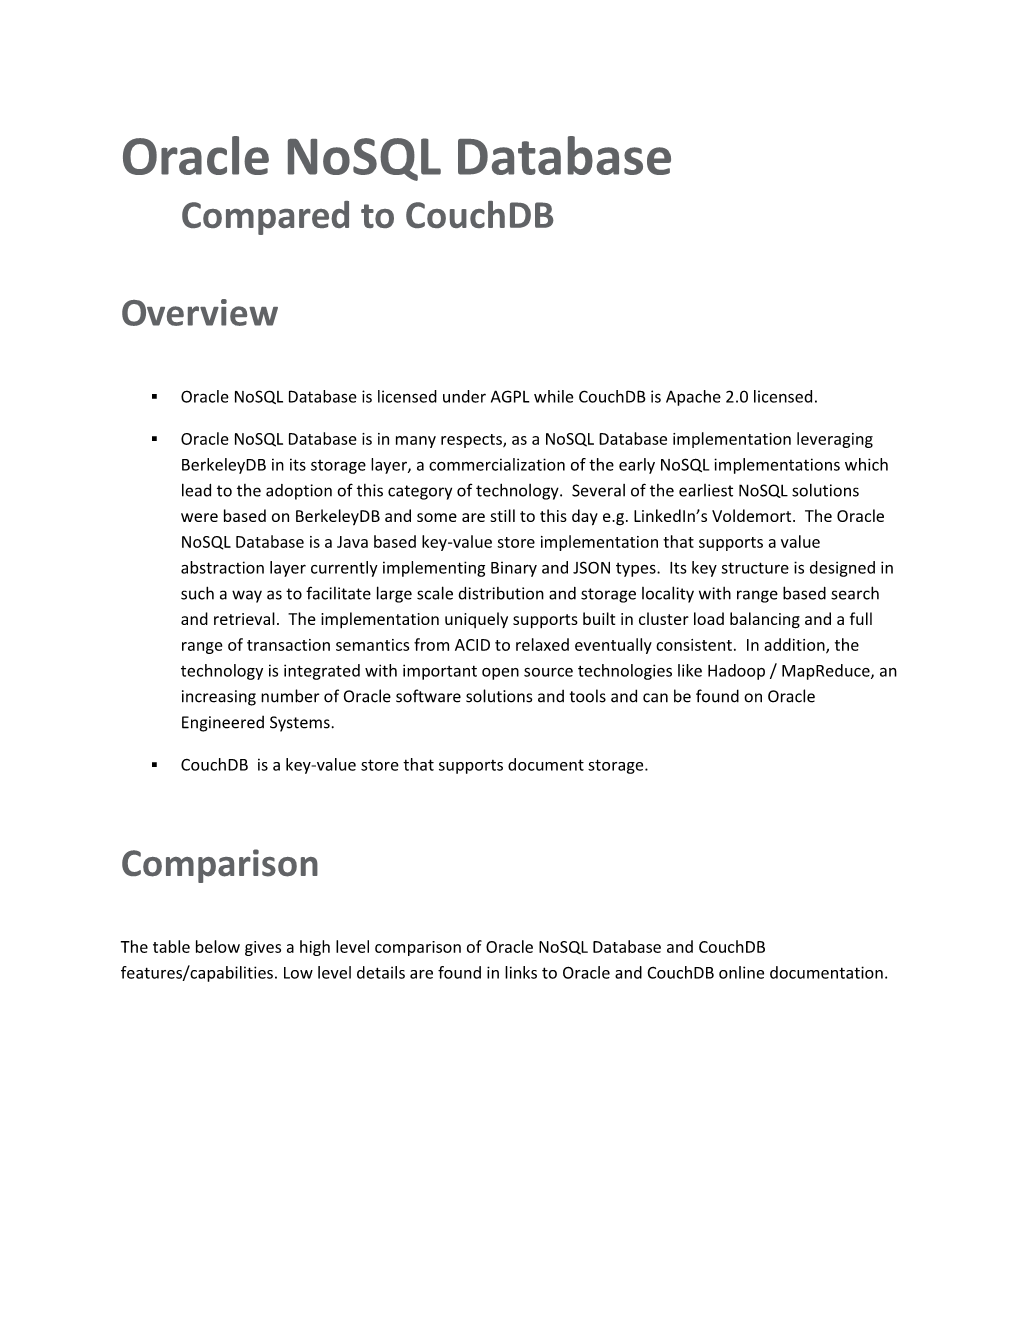 Oracle Nosql Database Compared to Couchdb